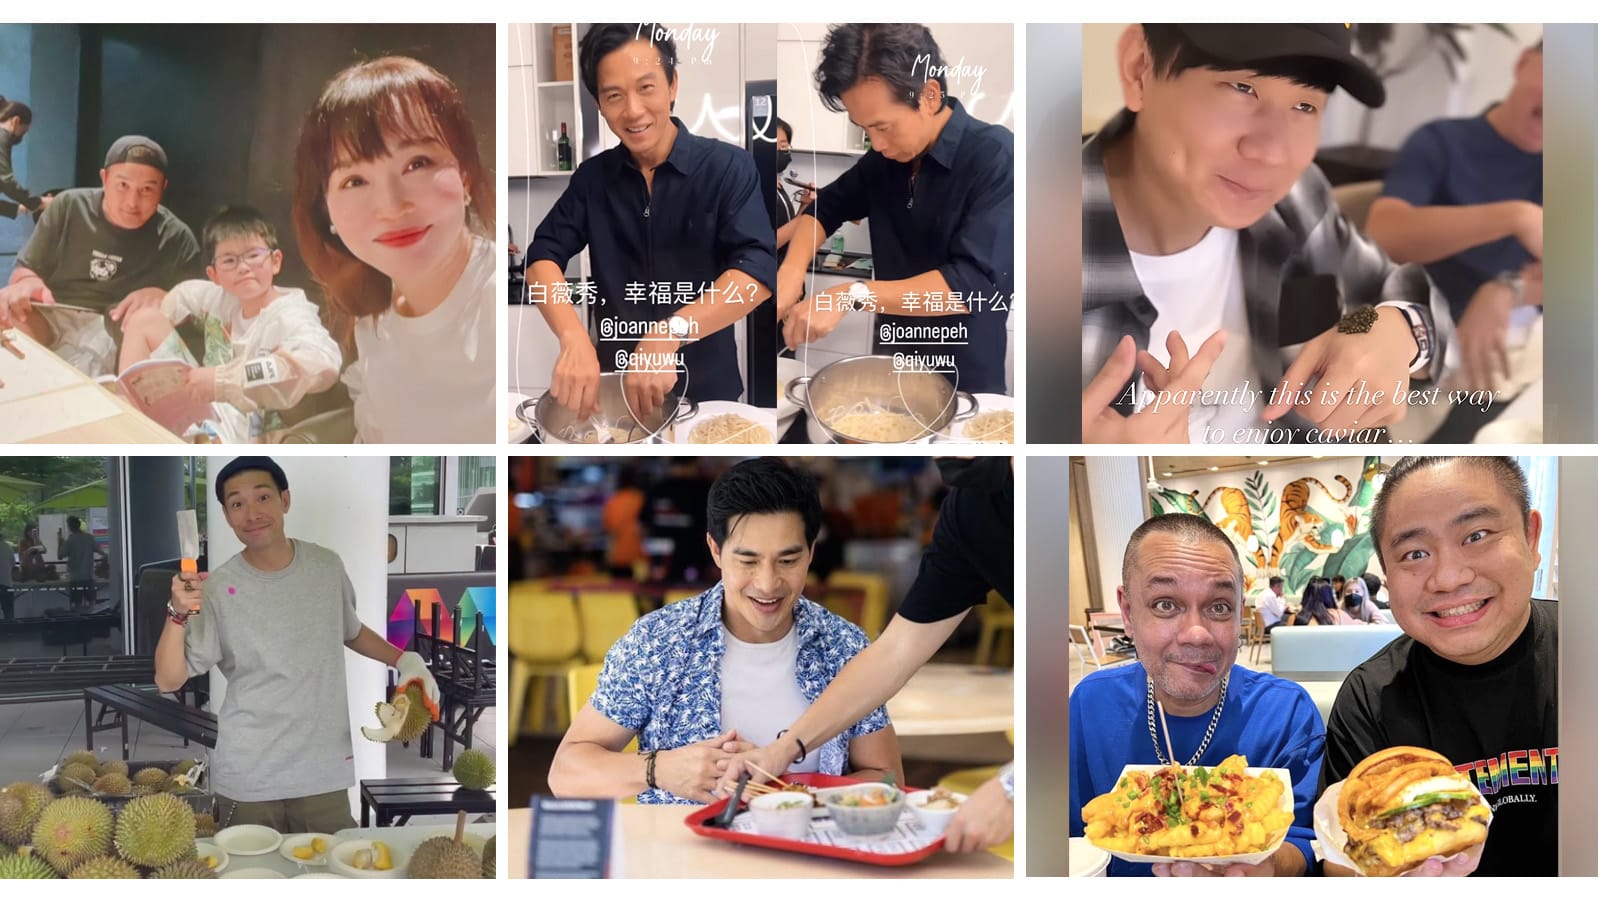 Foodie Friday: What The Stars Ate This Week (May 27 - Jun 3)